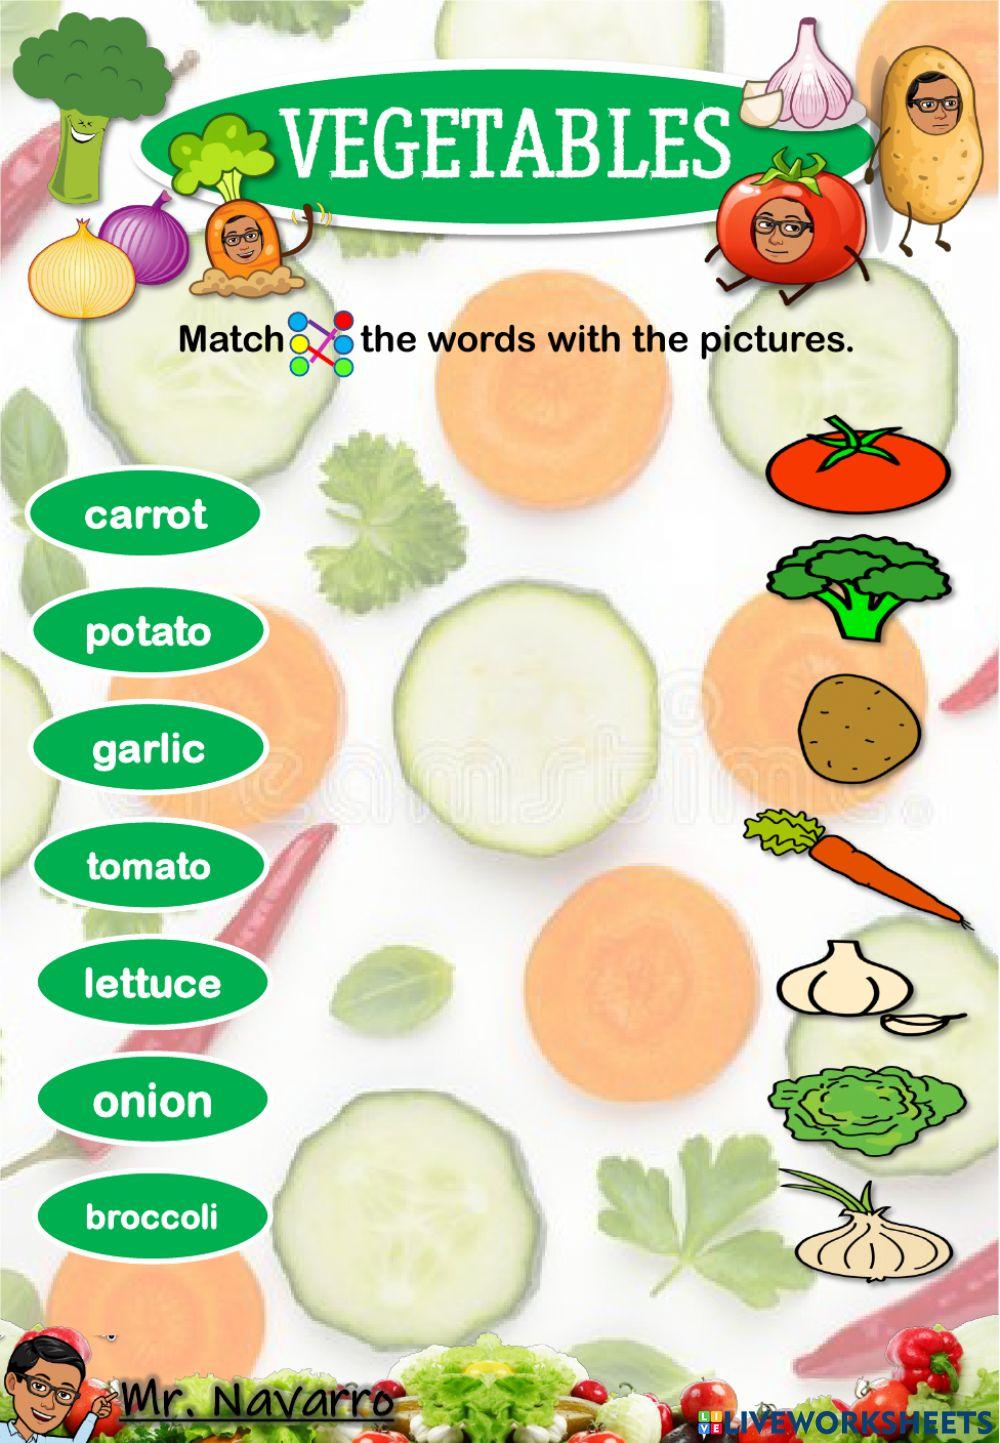 Vegetables (Match the words with the pictures)